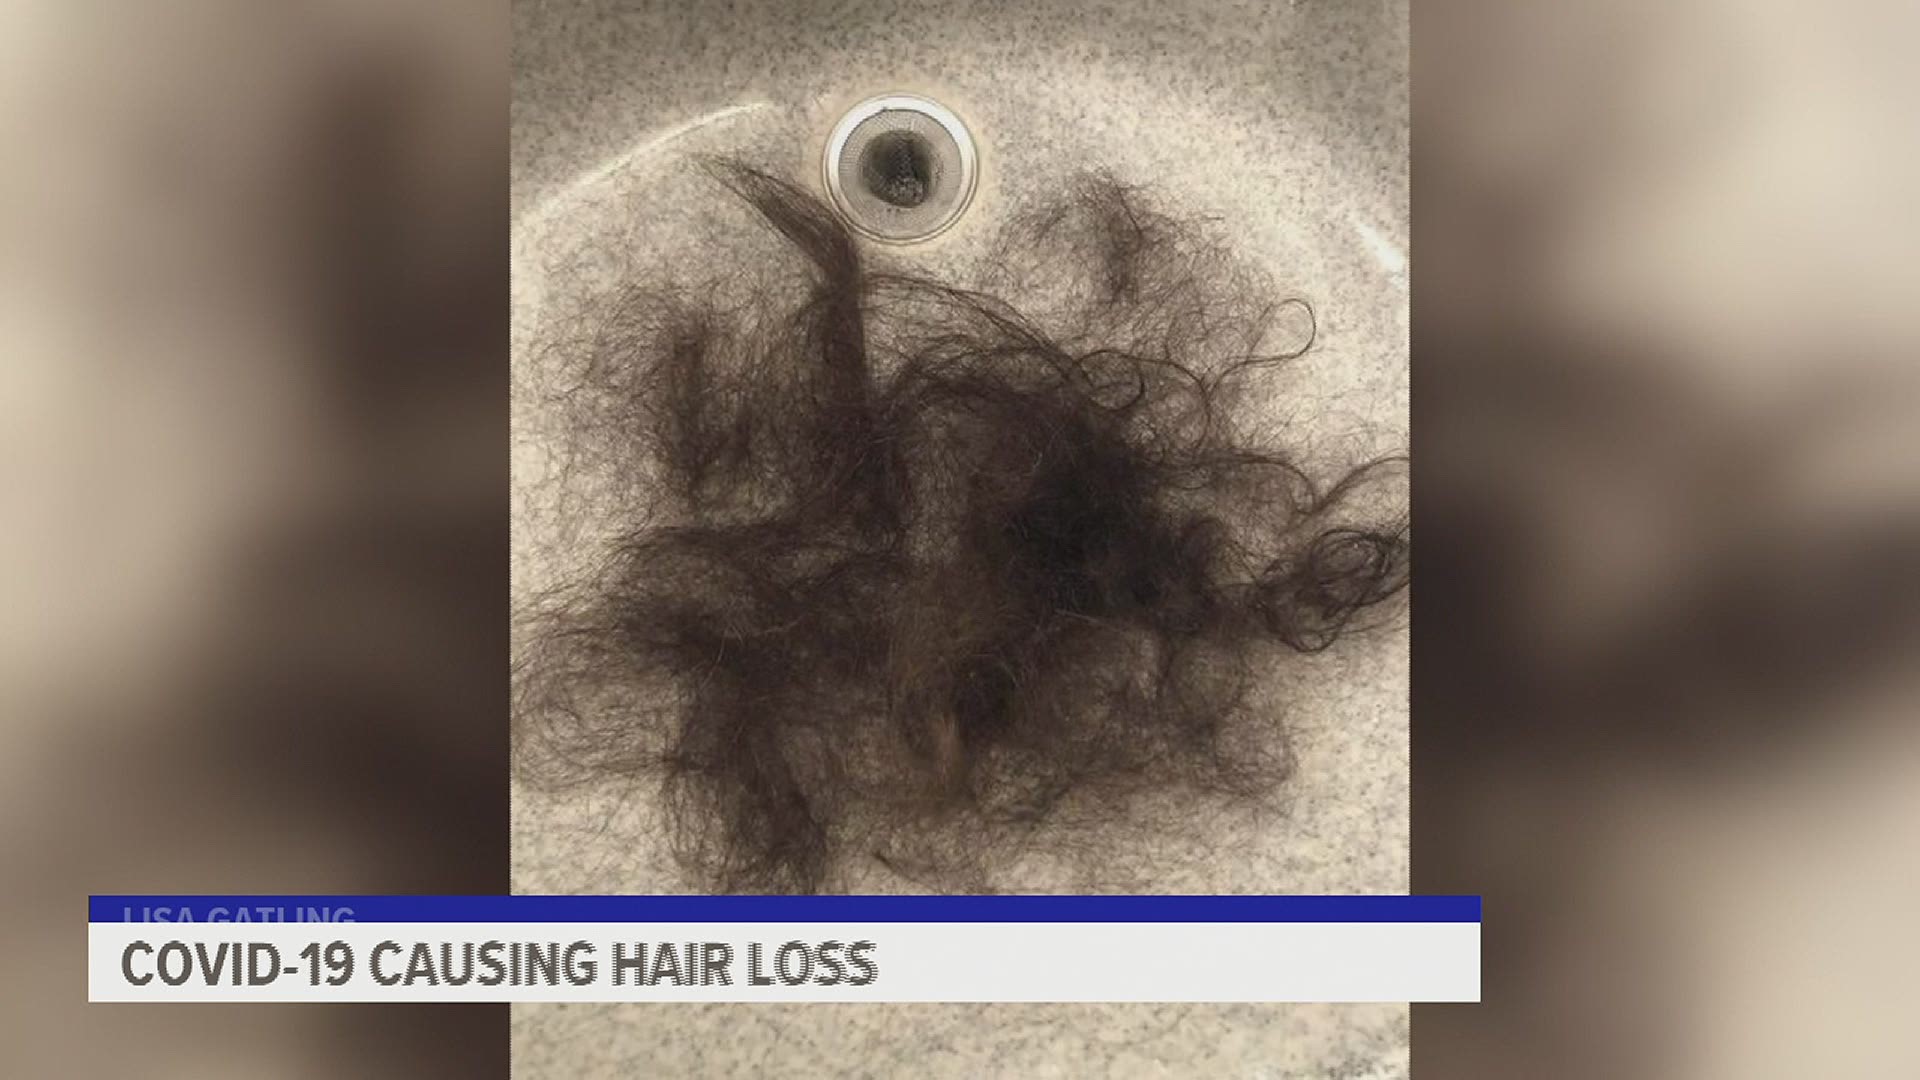 COVID-19 is causing hair loss: Here's why 